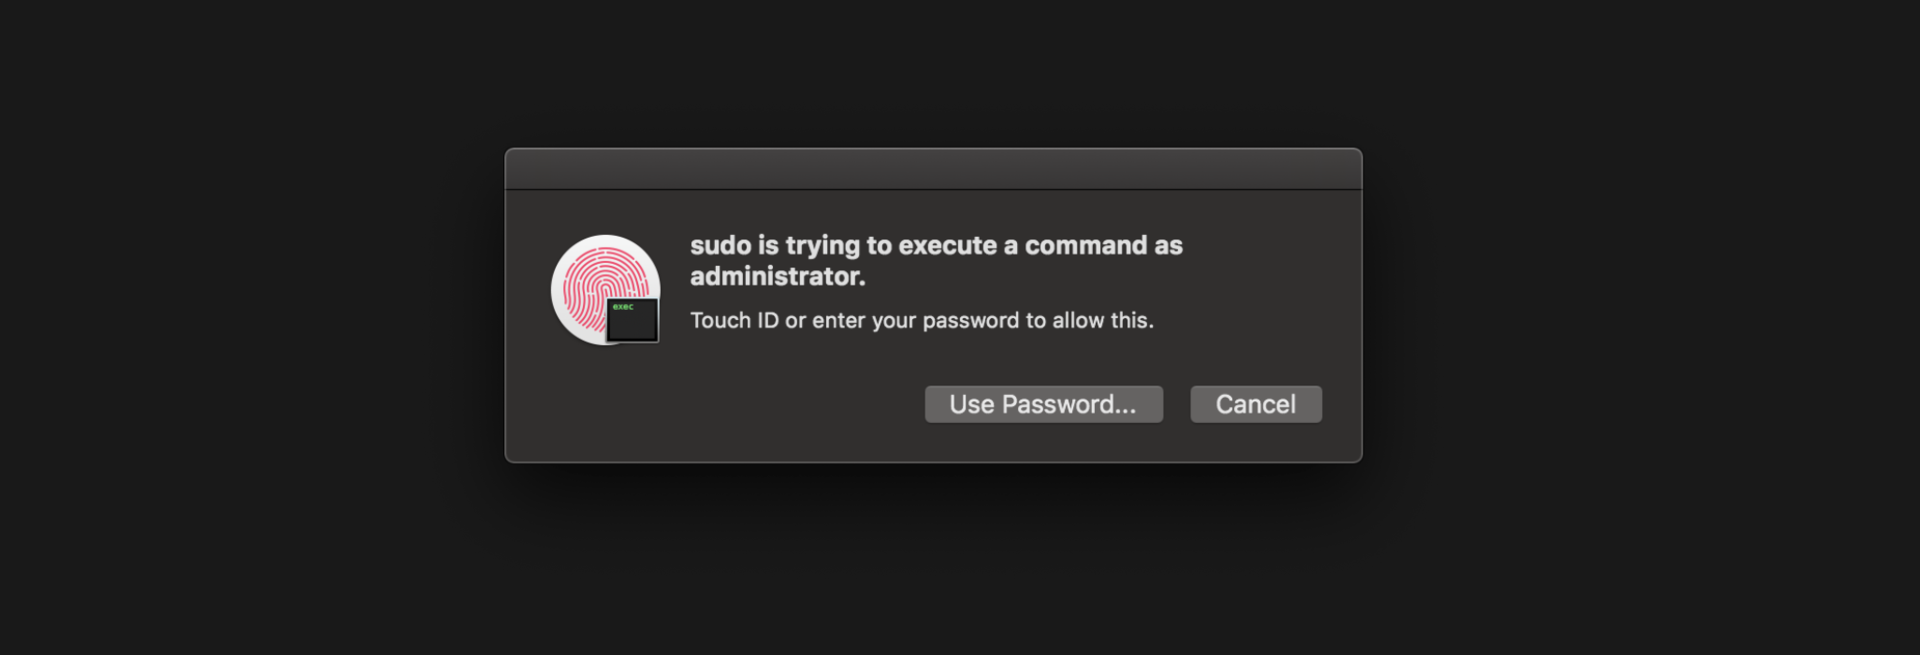 Make your life easier by using Touch ID with sudo commands instead of typing in your password!